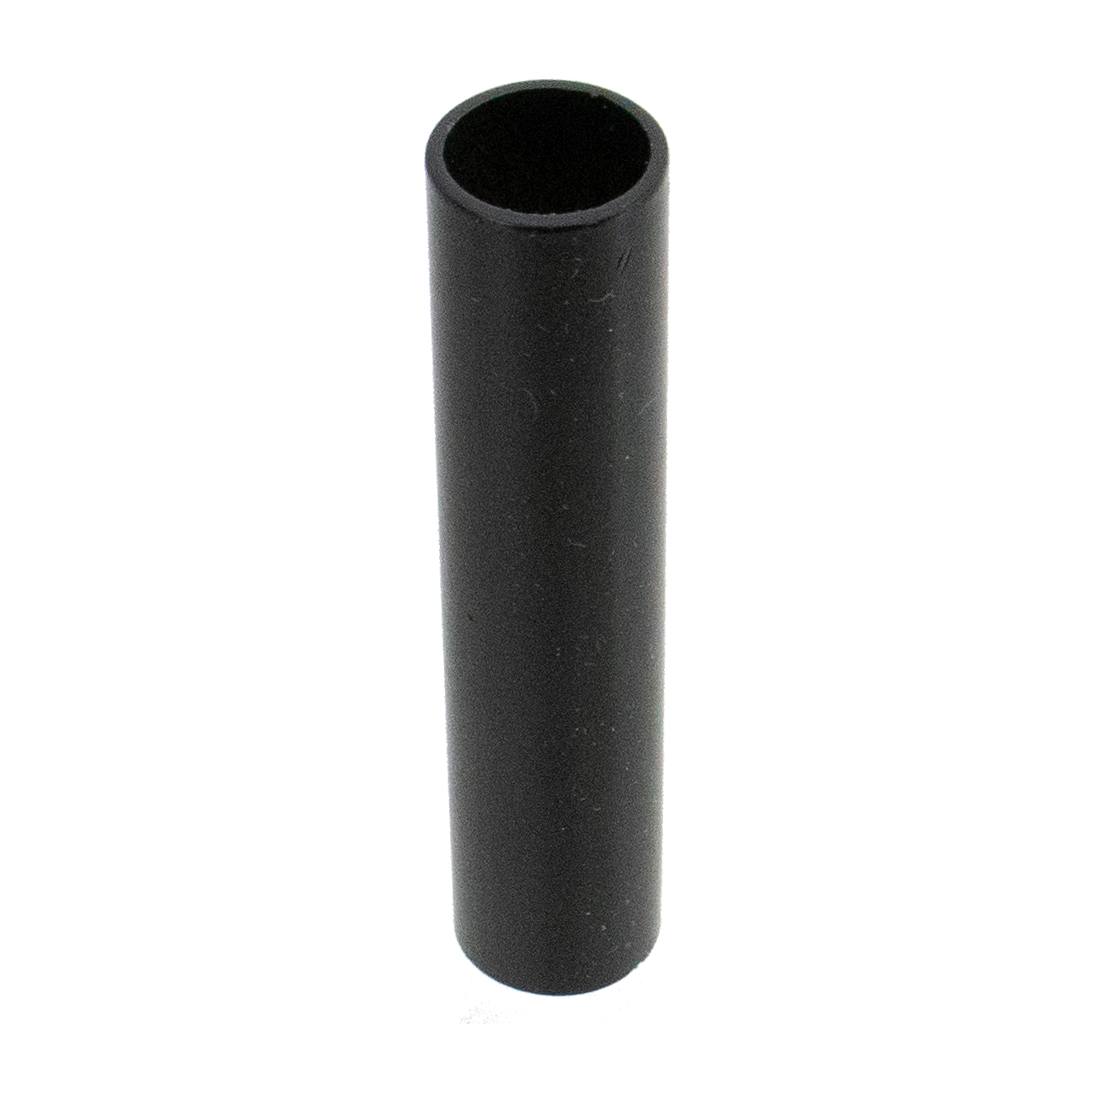 XERO Legacy Replacement Axle Spacer - Top View